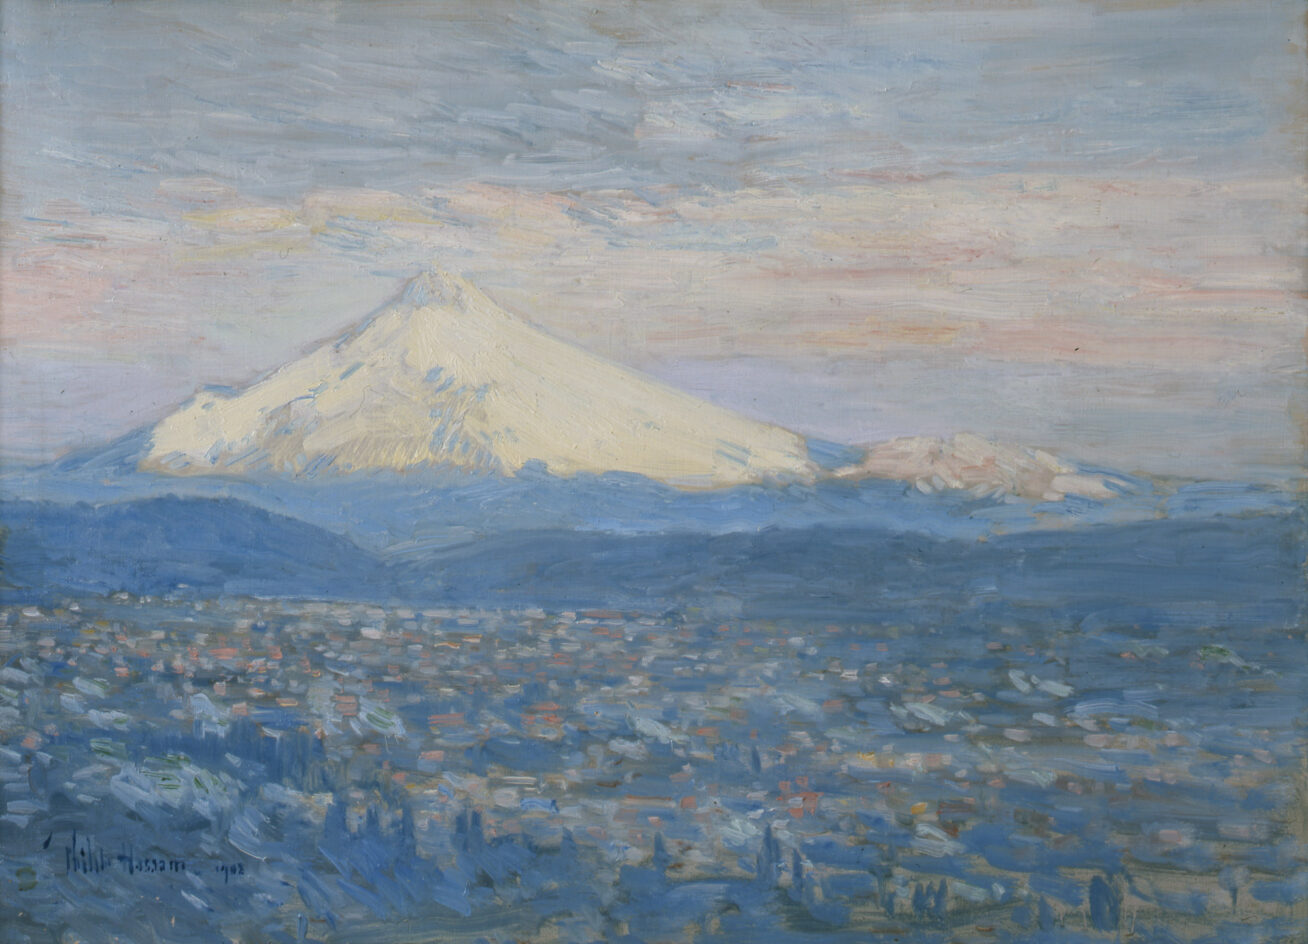 Painting in pastel colors of Mount Hood with the city of Portland, Oregon in the foreground.